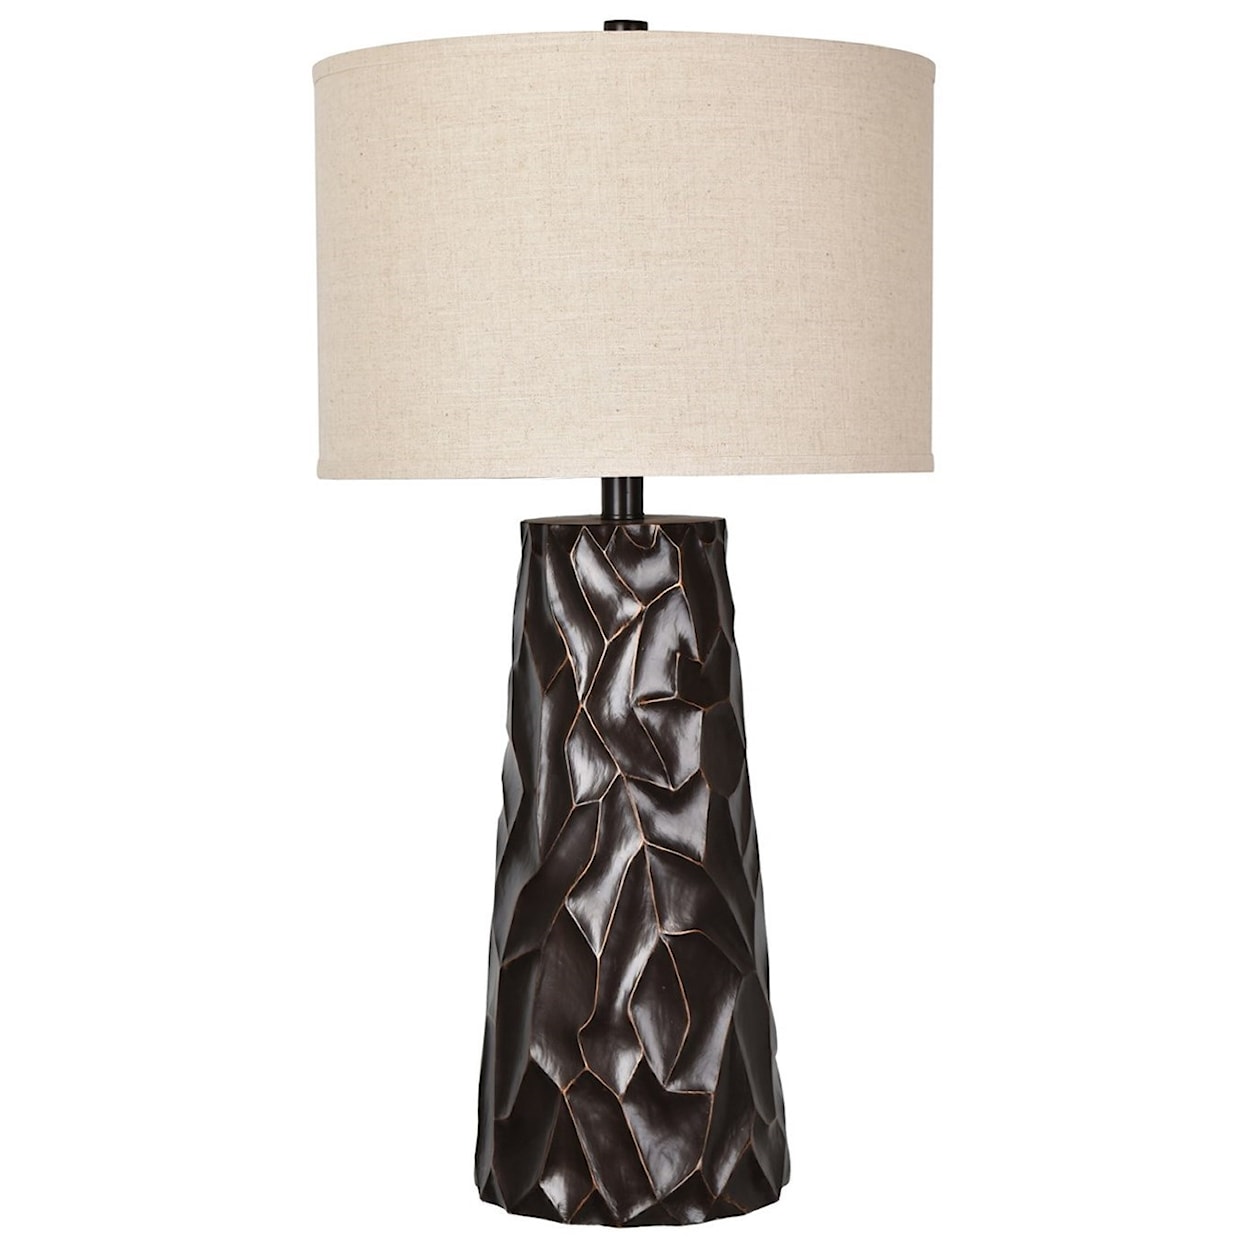 Crestview Collection Lighting Huston Table Lamp